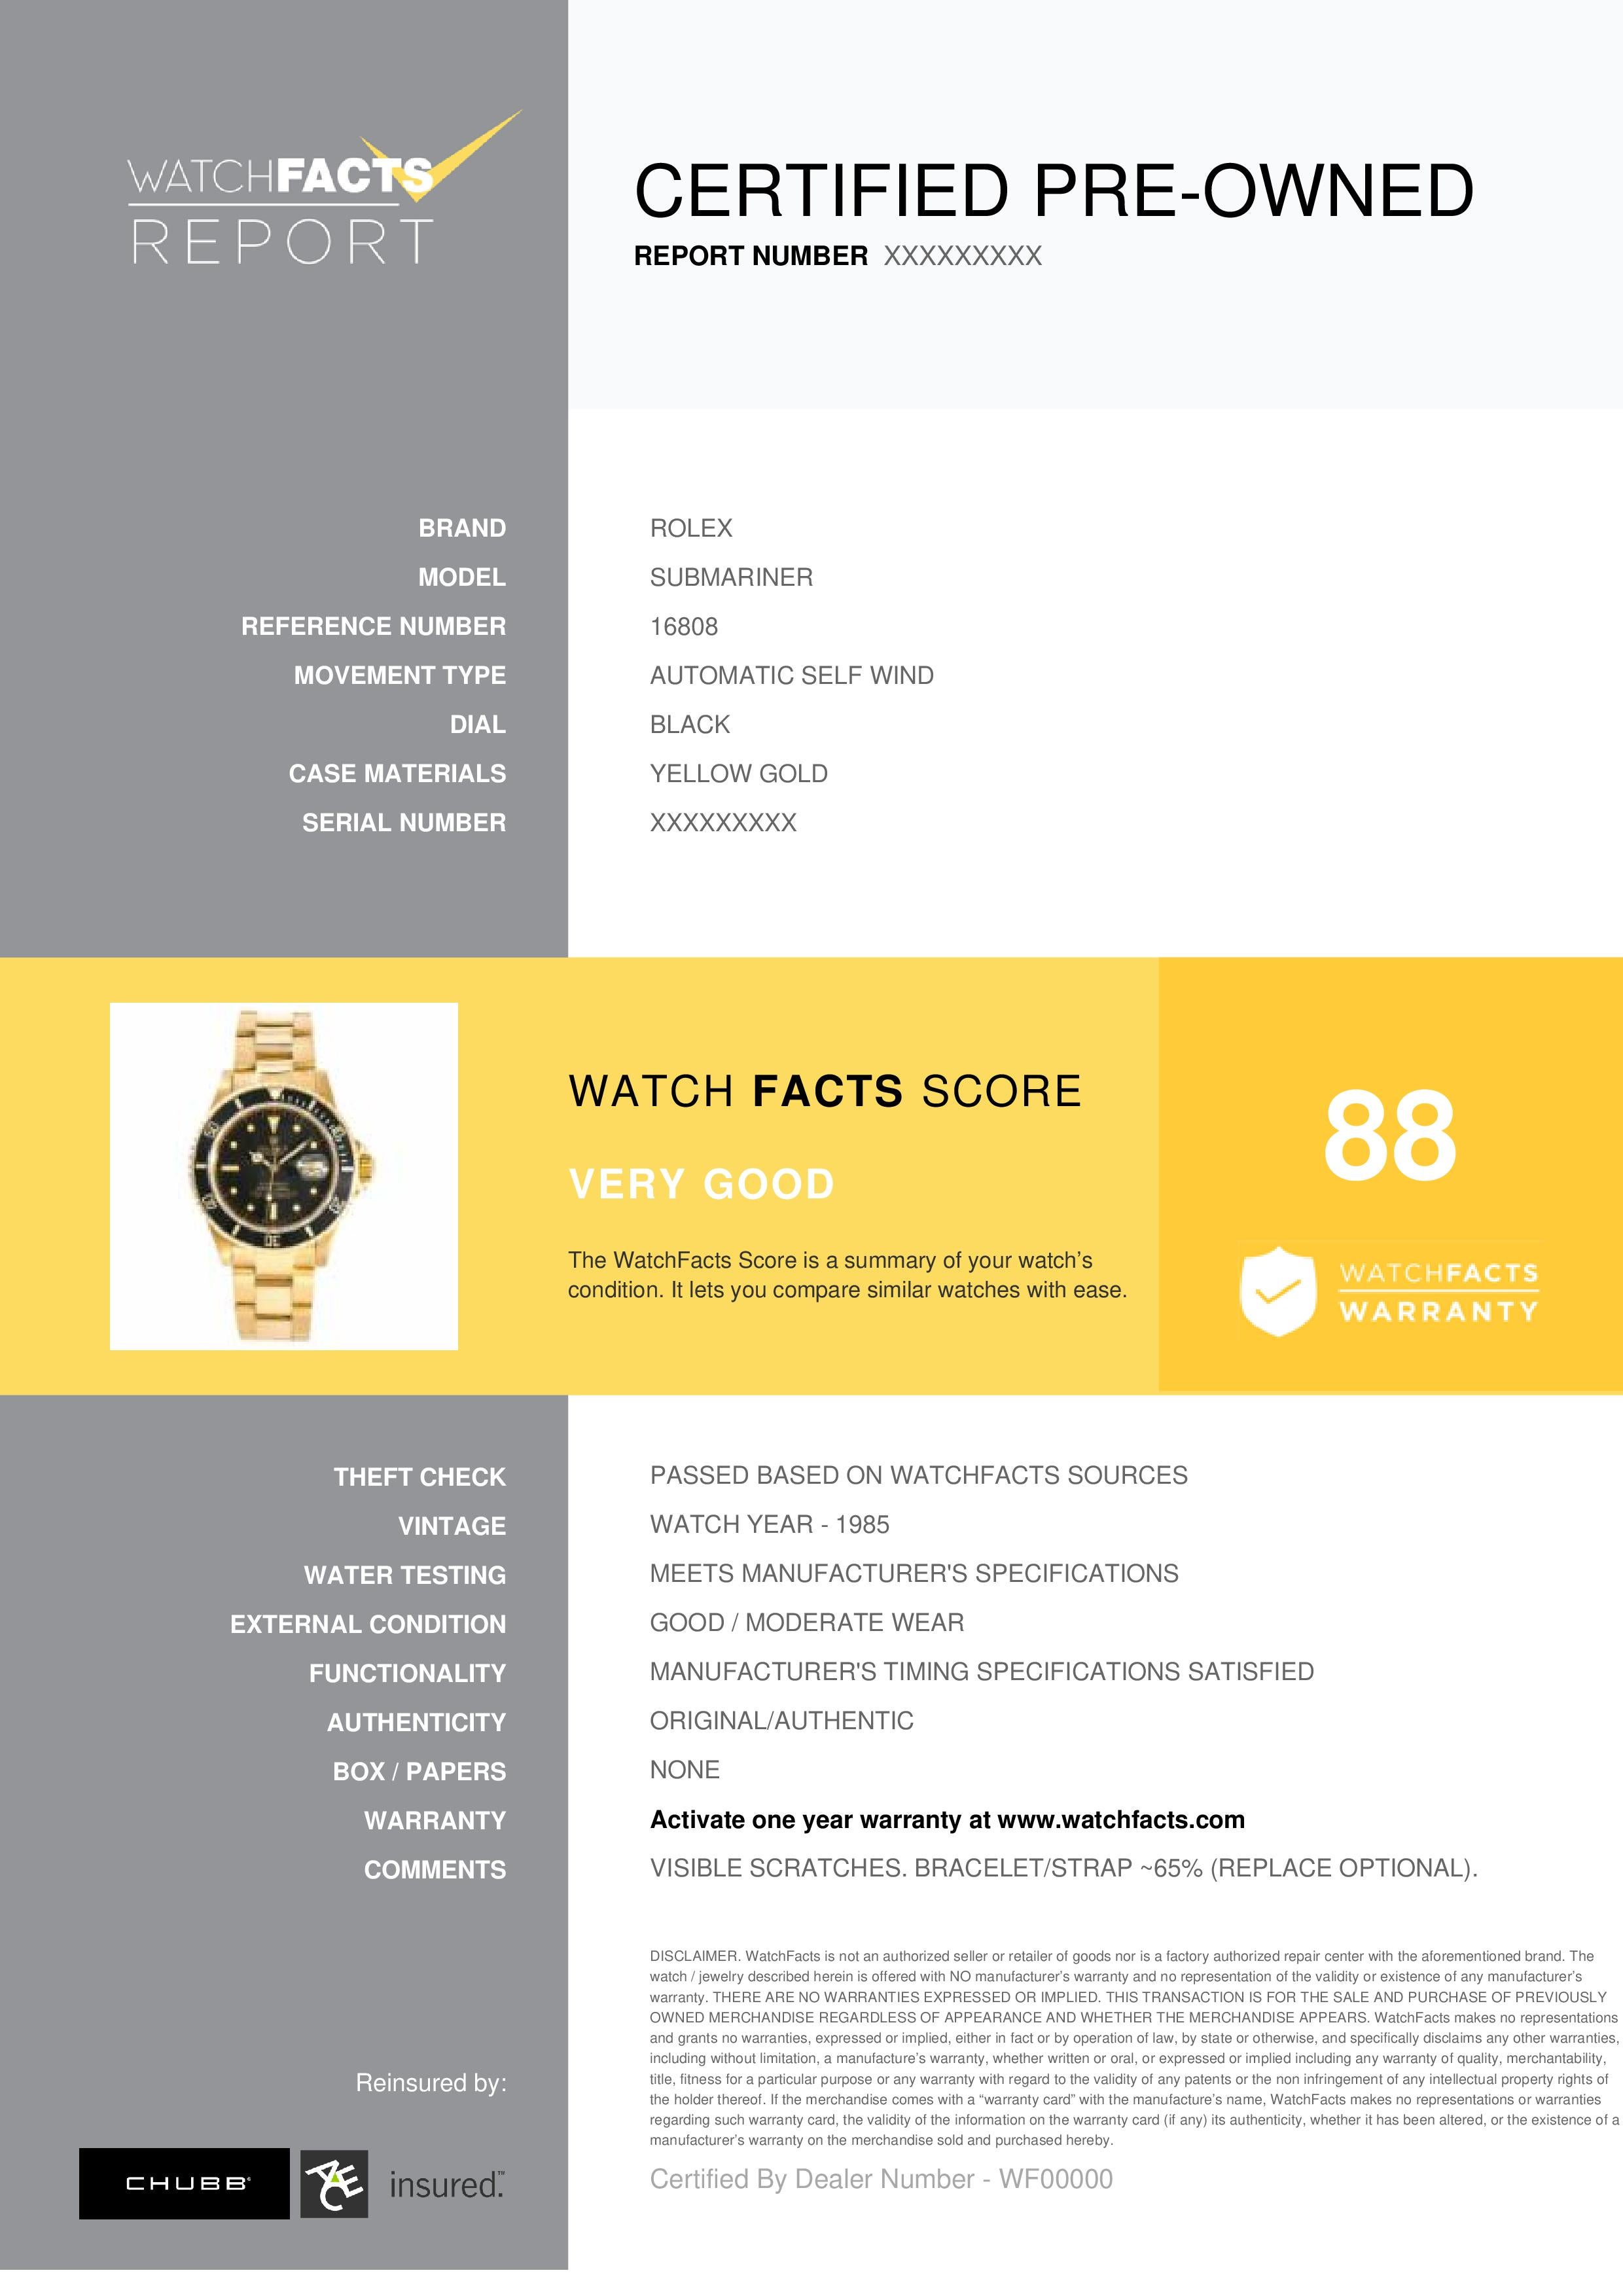 Rolex Submariner Reference #: 16808. Mens Automatic Self Wind Watch Yellow Gold Black 40 MM. Verified and Certified by WatchFacts. 1 year warranty offered by WatchFacts.
